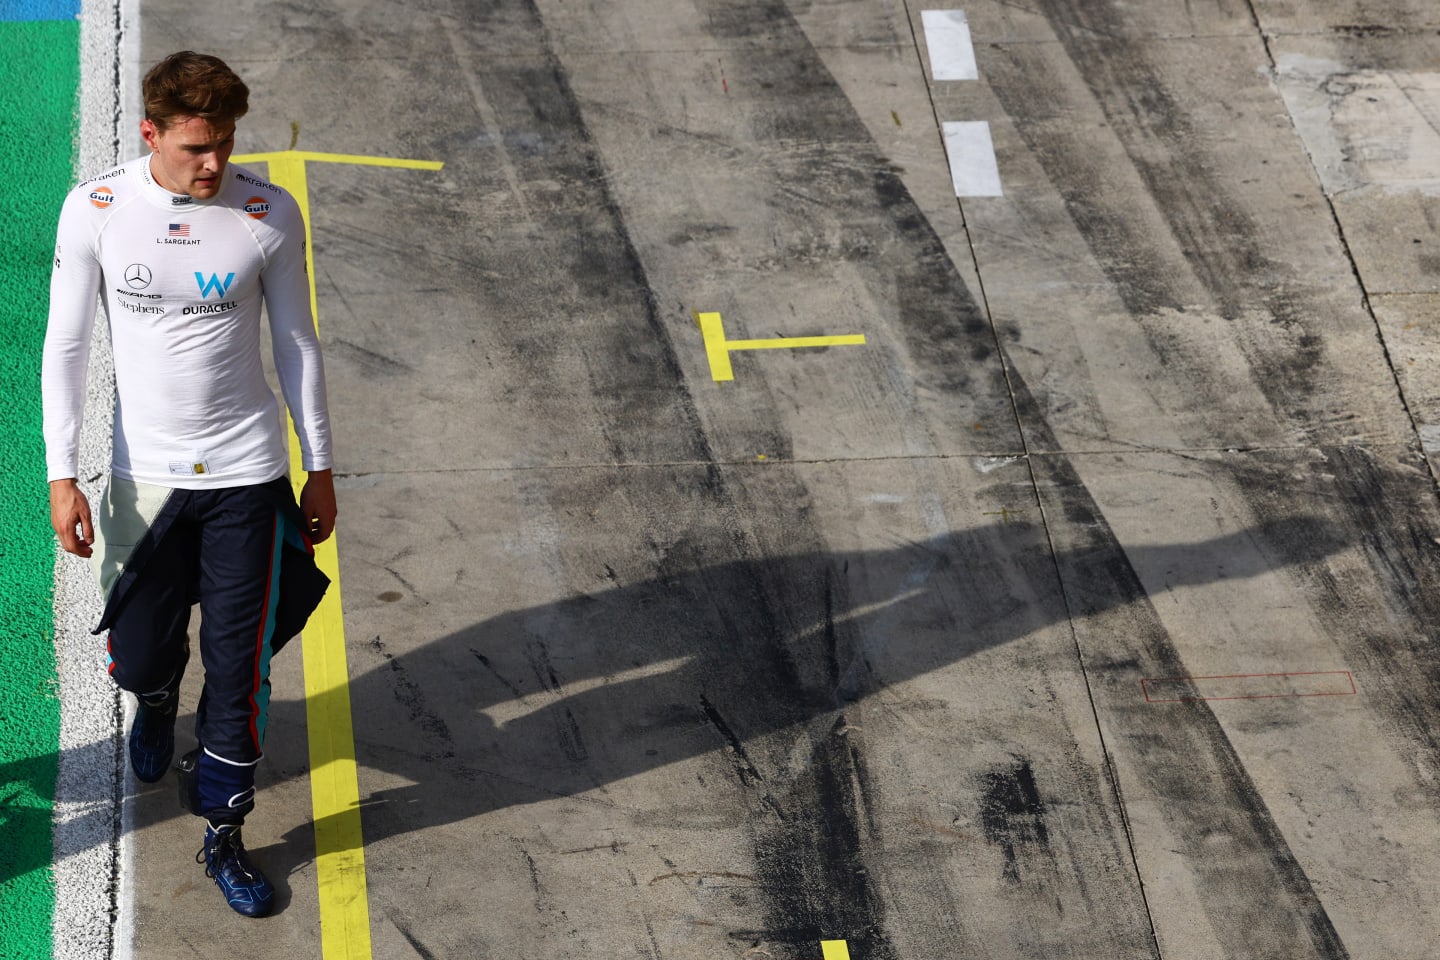 MONZA, ITALY - SEPTEMBER 02: 15th placed qualifier Logan Sargeant of United States and Williams walks in the Pitlane during qualifying ahead of the F1 Grand Prix of Italy at Autodromo Nazionale Monza on September 02, 2023 in Monza, Italy. (Photo by Mark Thompson/Getty Images)